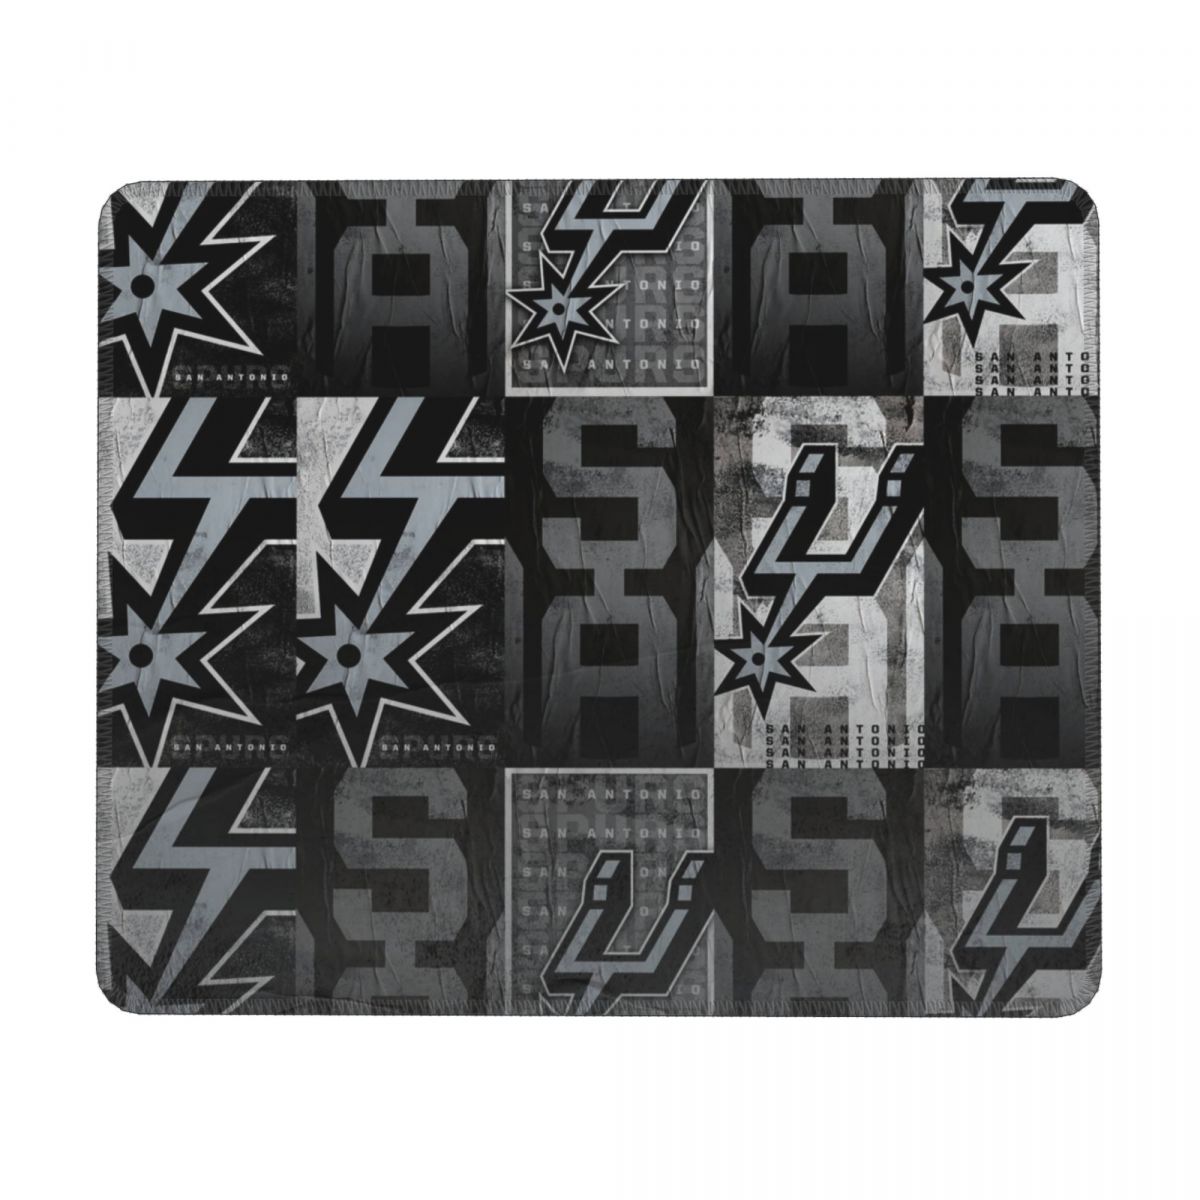 San Antonio Spurs Logo Pattern Square Gaming Mouse Pad with Stitched Edge